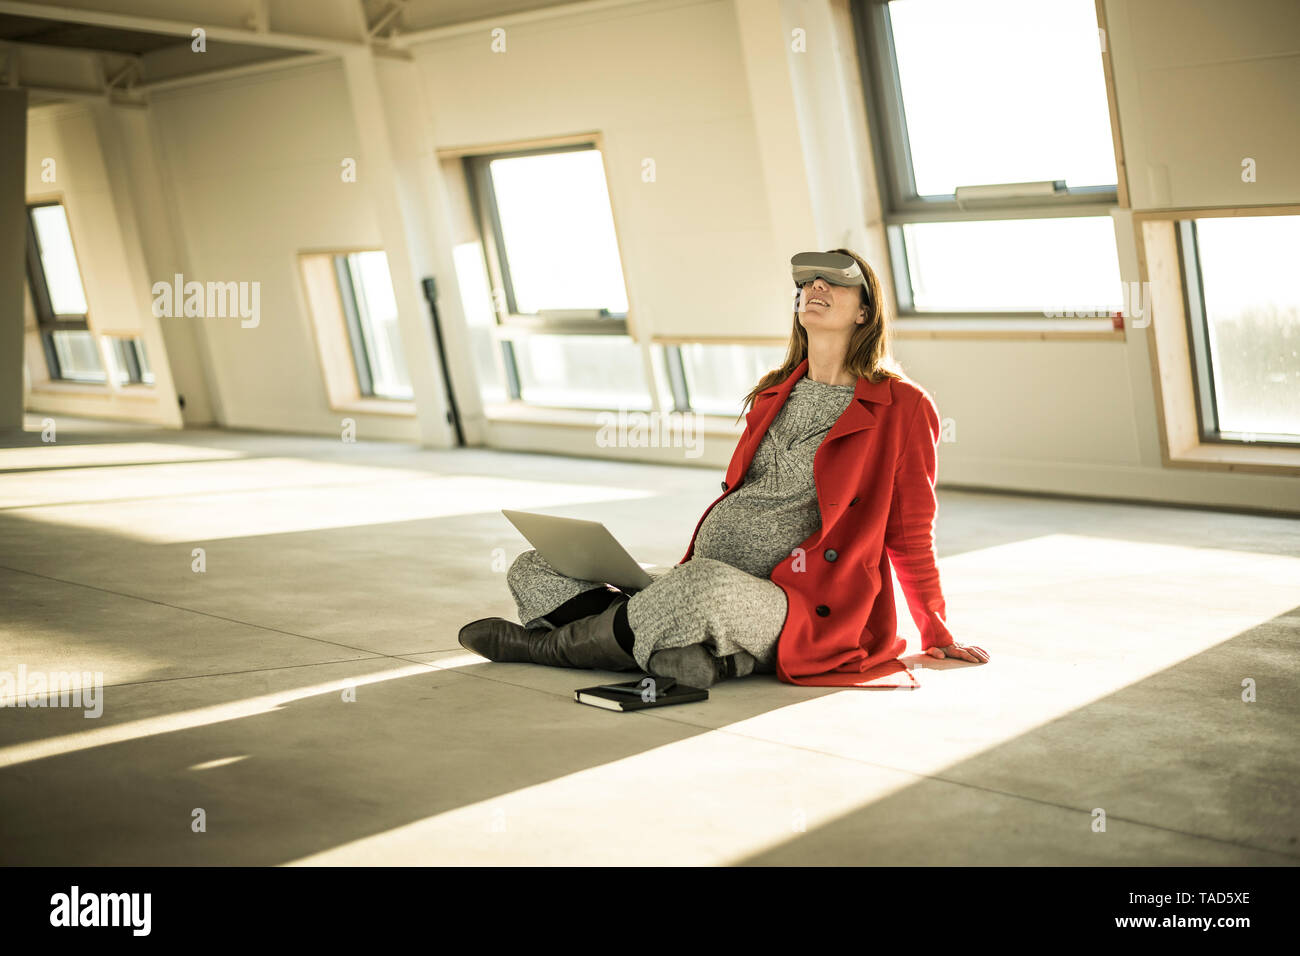 Pregnant busnesswoman sitting on floor of new office rooms, using VR goggles and laptop Stock Photo